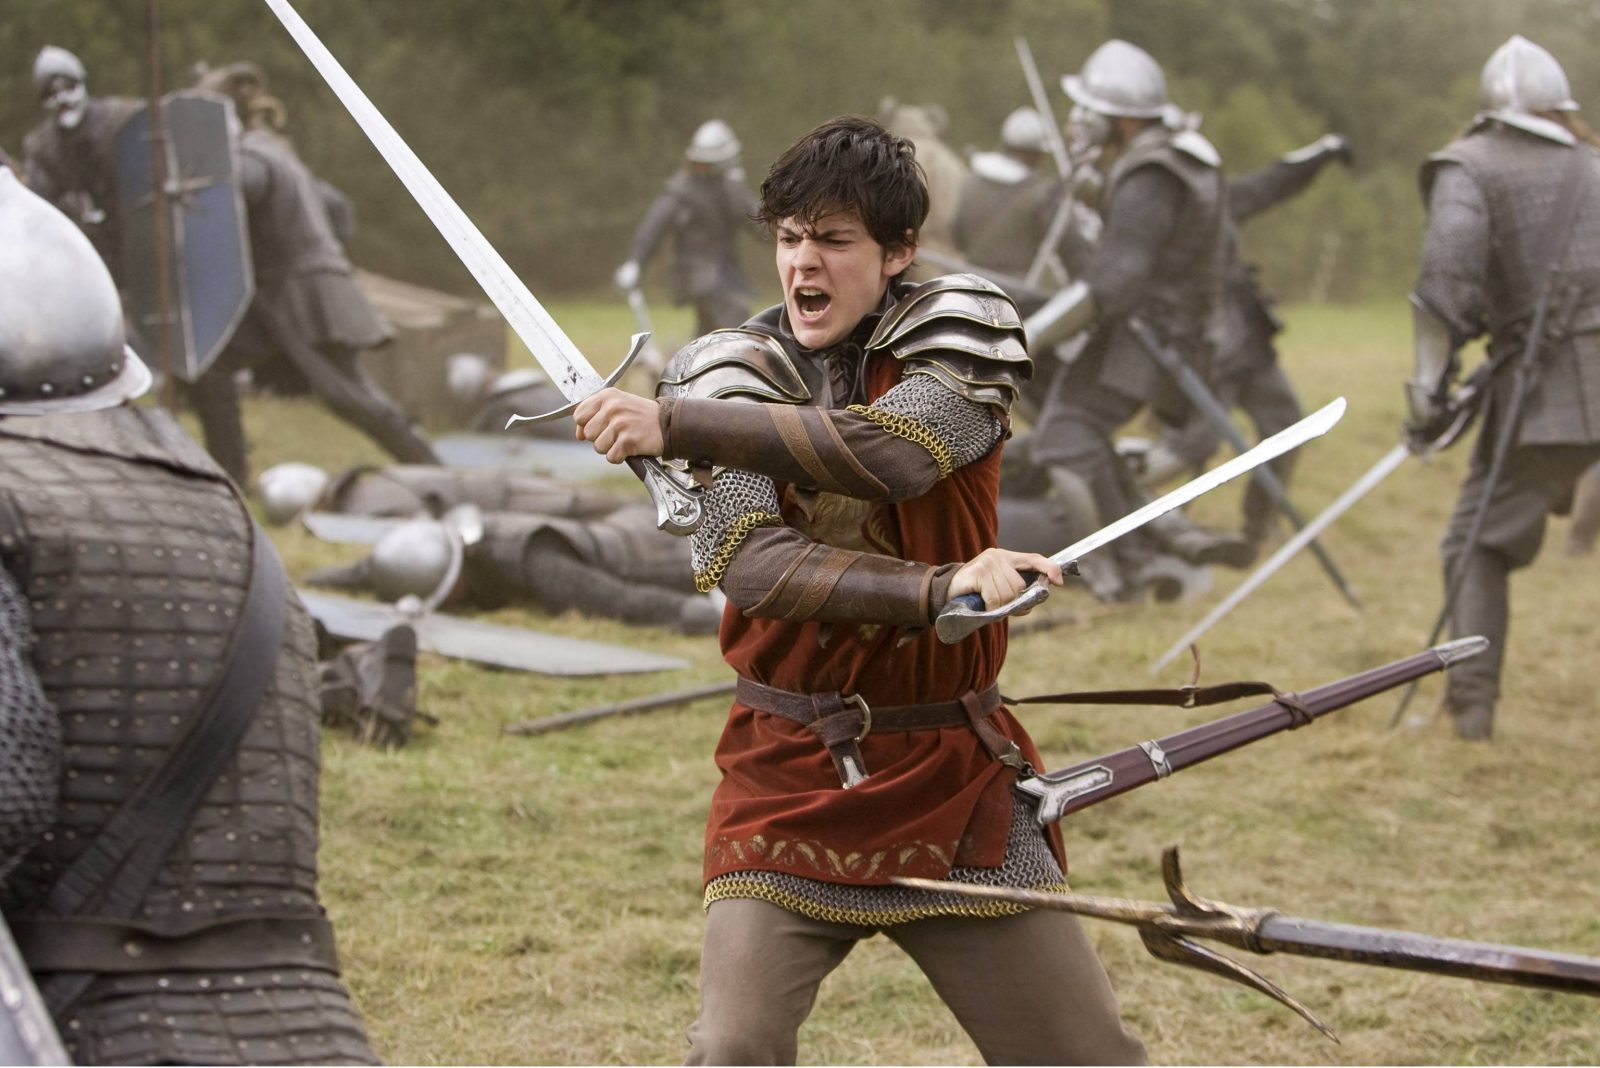 Which Three Marvel Characters Are You A Combo Of? SKANDAR KEYNES